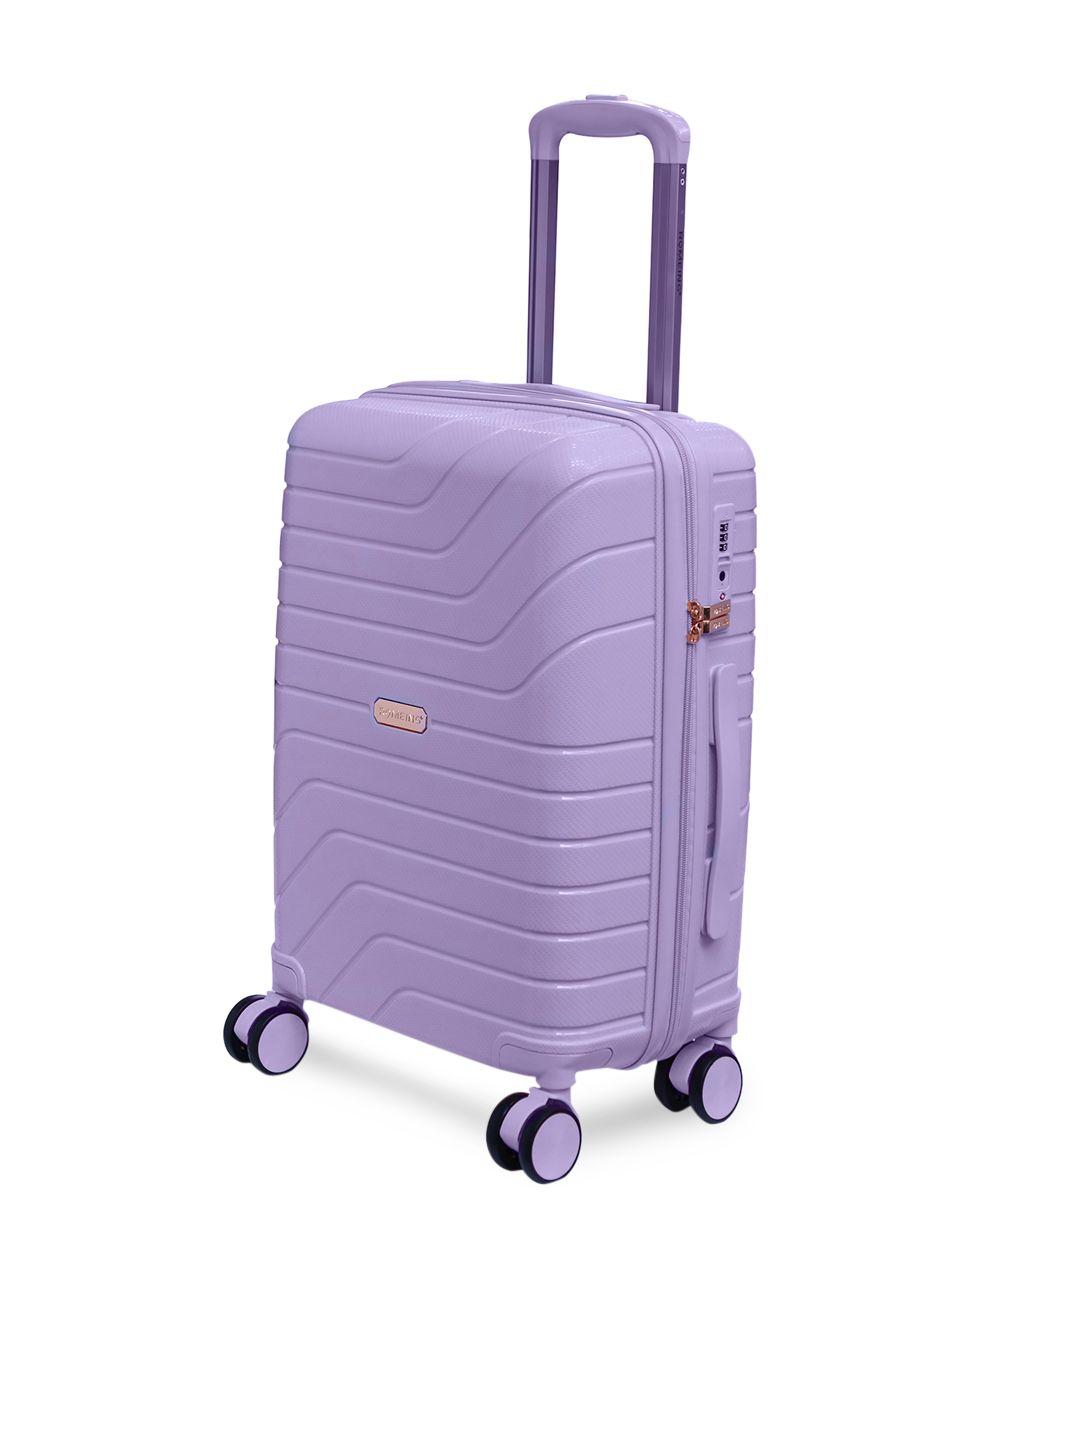 romeing tuscany textured hard-sided cabin trolley bag